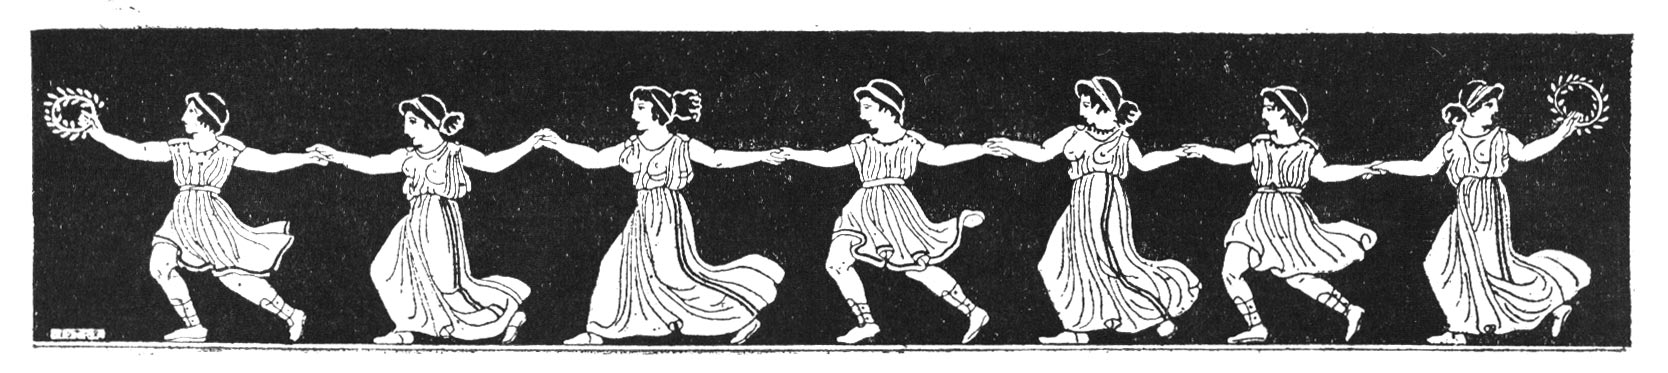 The spirit of the dance is as alive today in Greece as it was 3000 years ago.